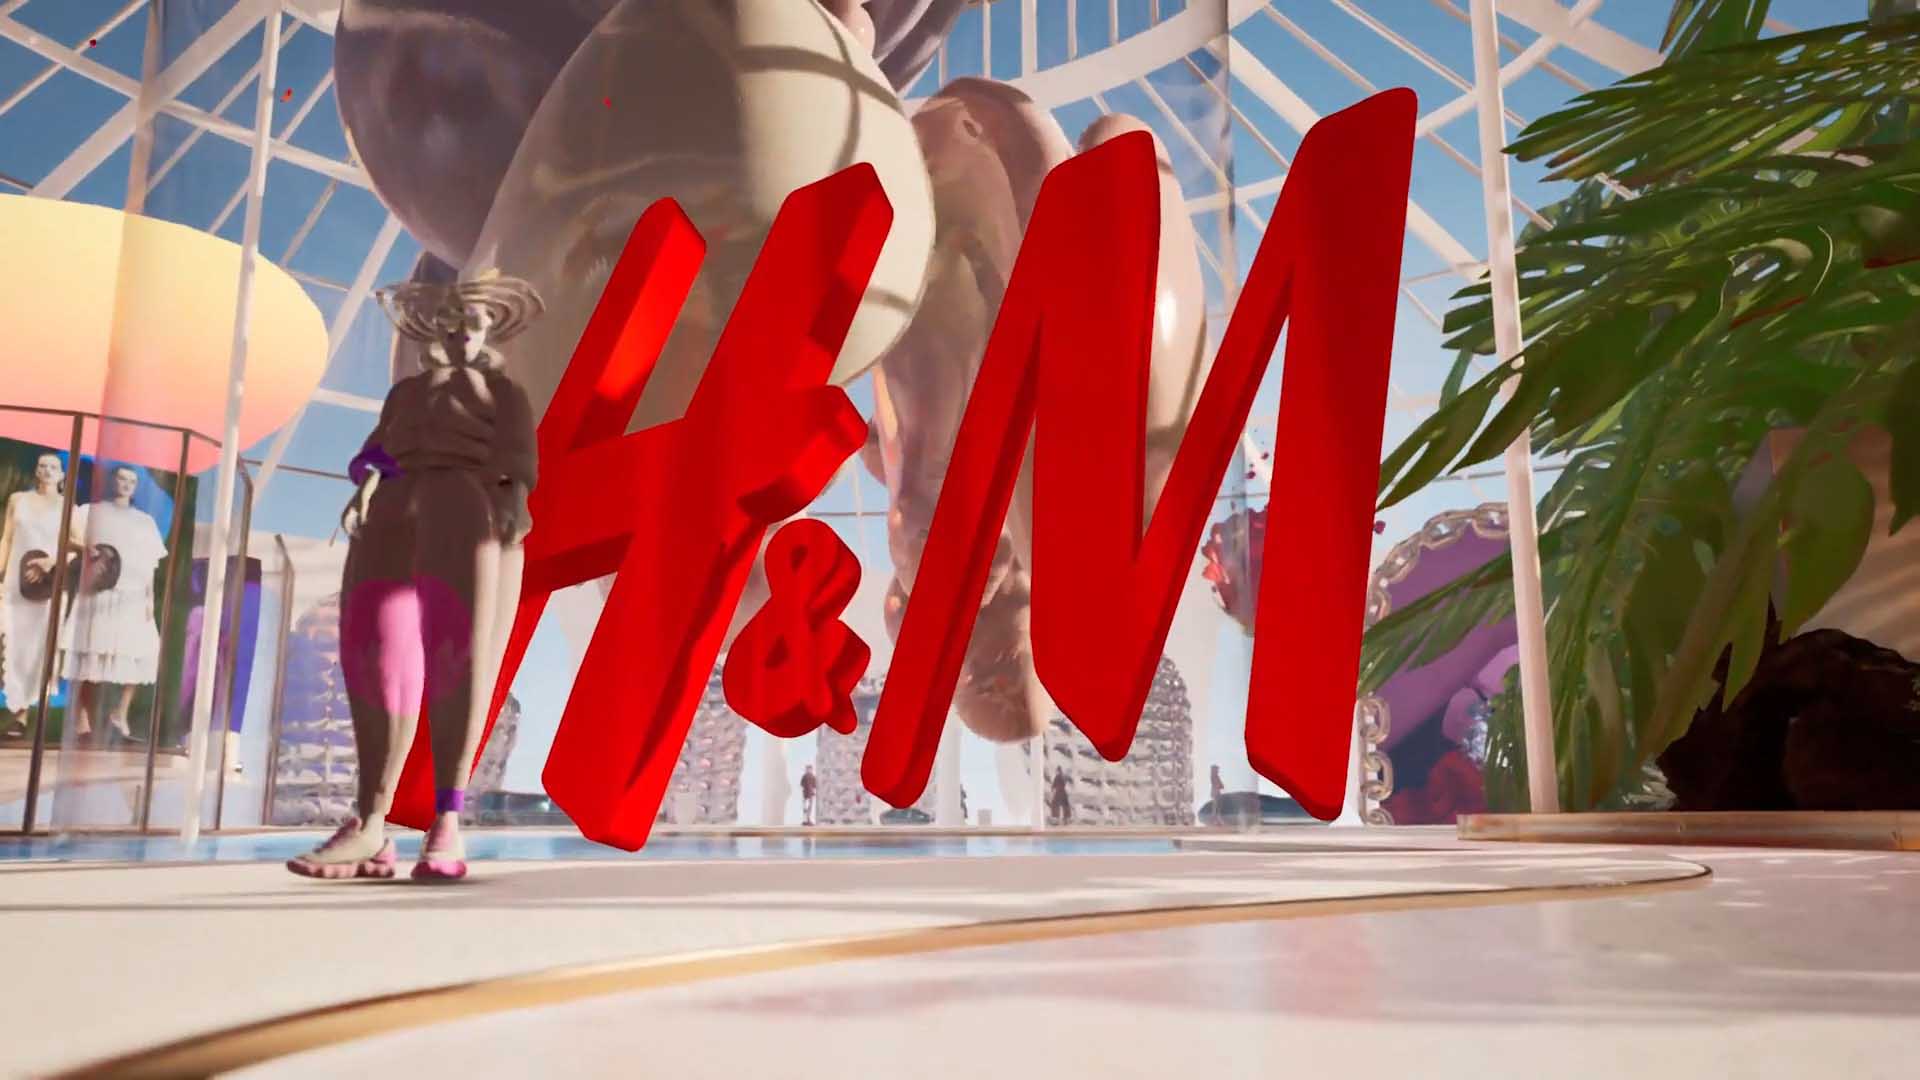 H&M opens Roblox experience allowing users to create virtual garments